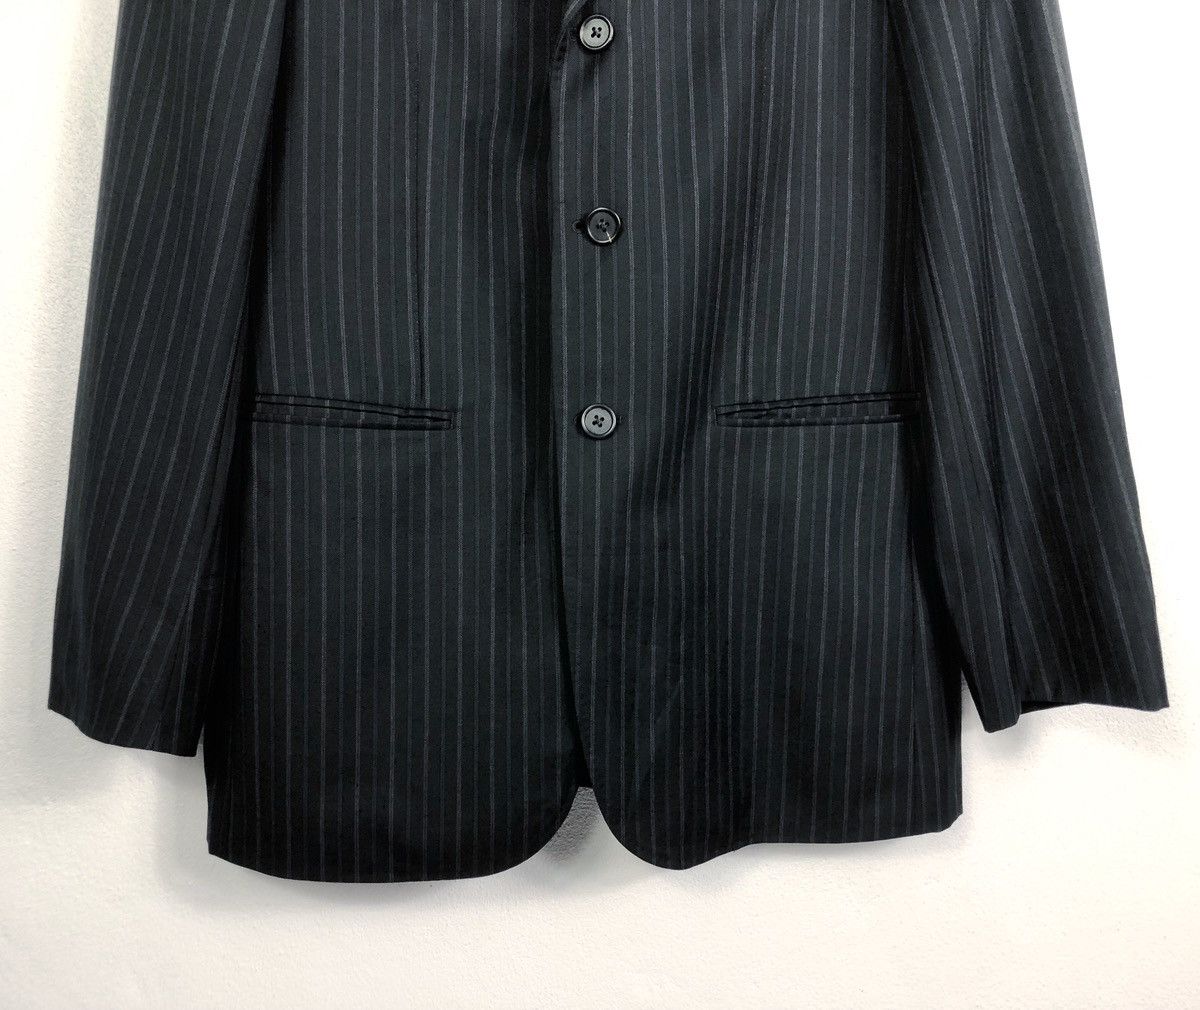 Paul Smith Rare Paul Smith London Blazer Suit Made in Italy Size US L / EU 52-54 / 3 - 3 Thumbnail